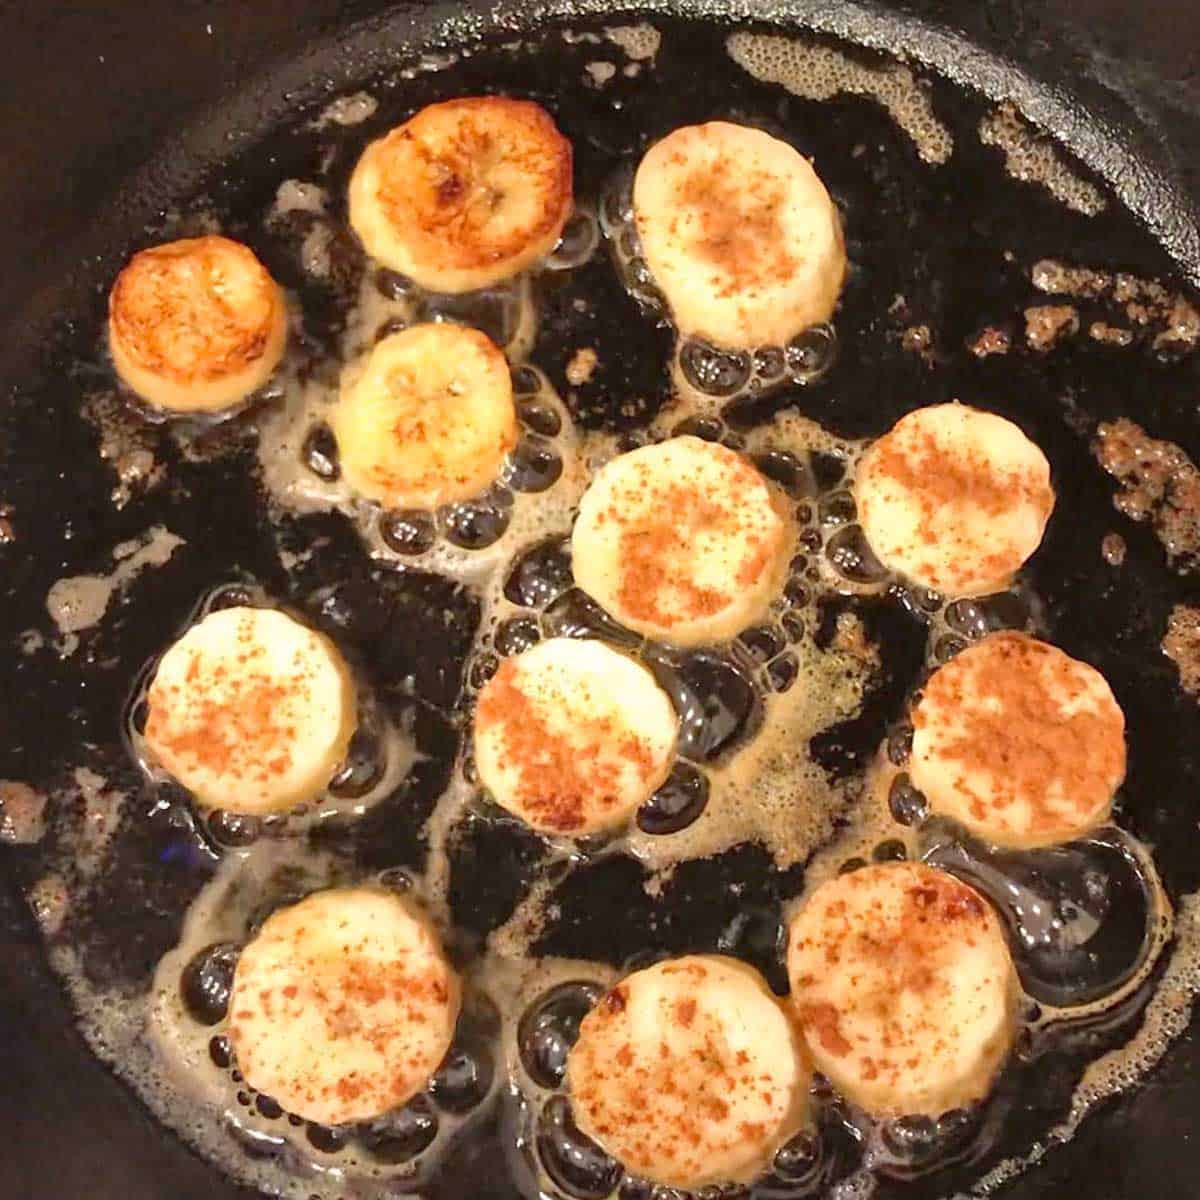 Banana slices cooking in a skillet. 